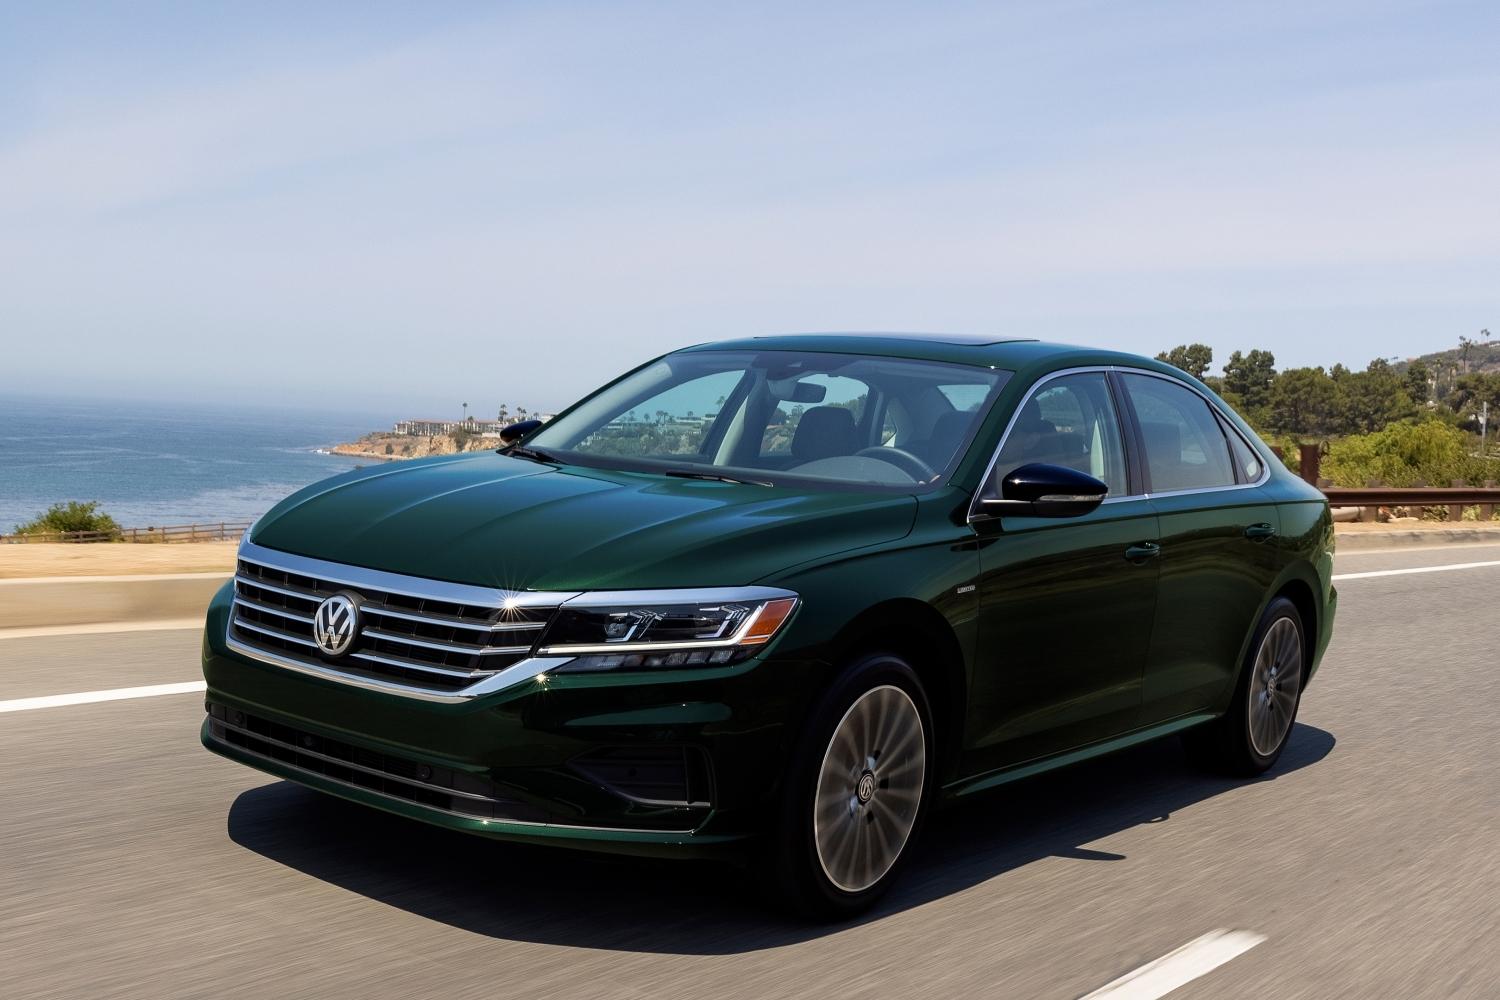 Volkswagen offers a few different trim levels for the 2022 Passat, so which is right for you?